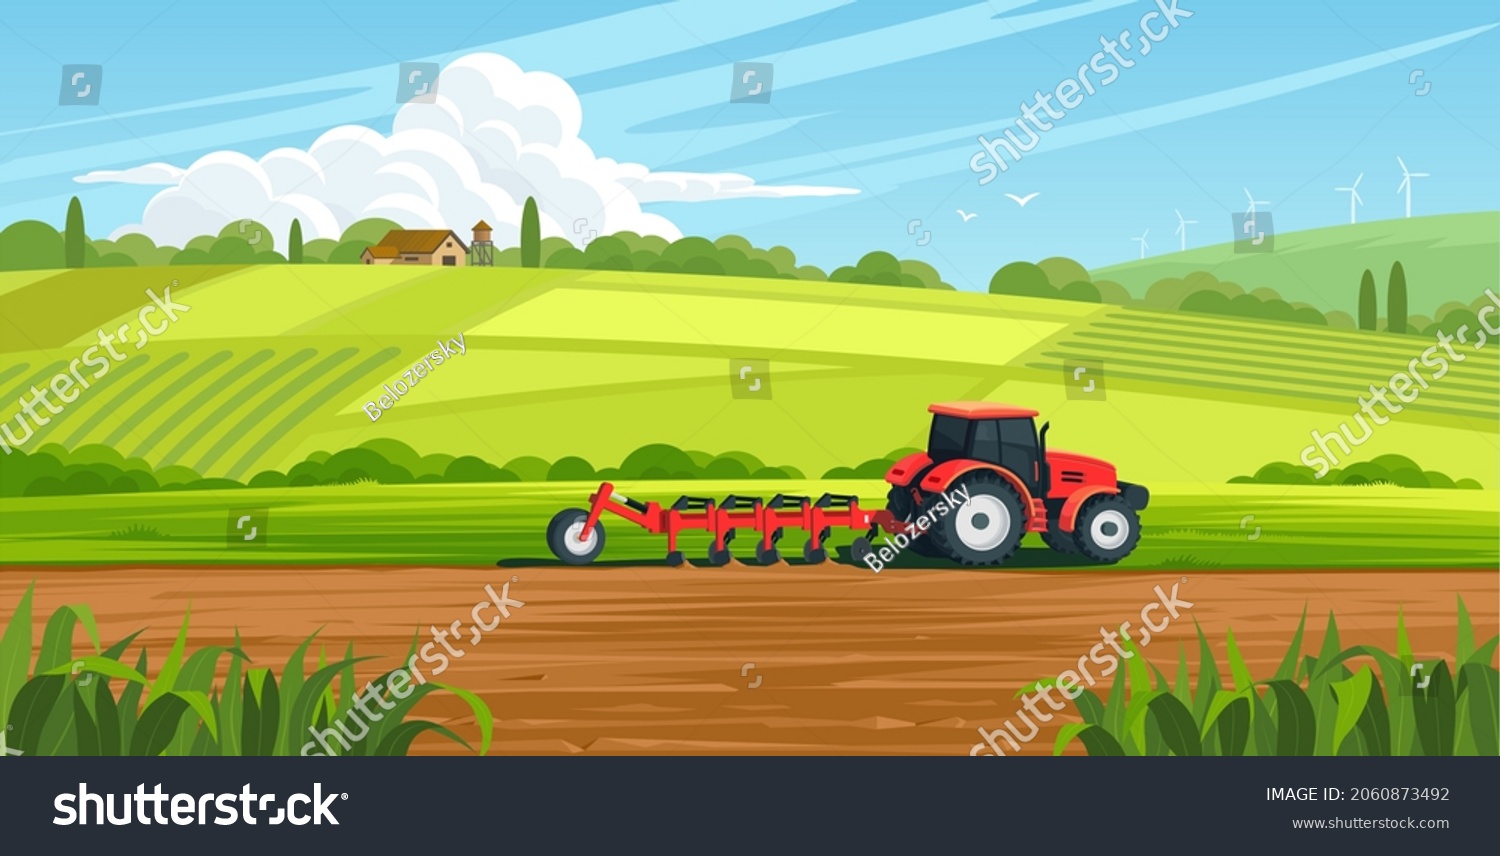 Agriculture concept. Tractor plowing the field on rural landscape background. Soil cultivation process. Farm life. Сountryside landscape. Farmland vector illustration. #2060873492